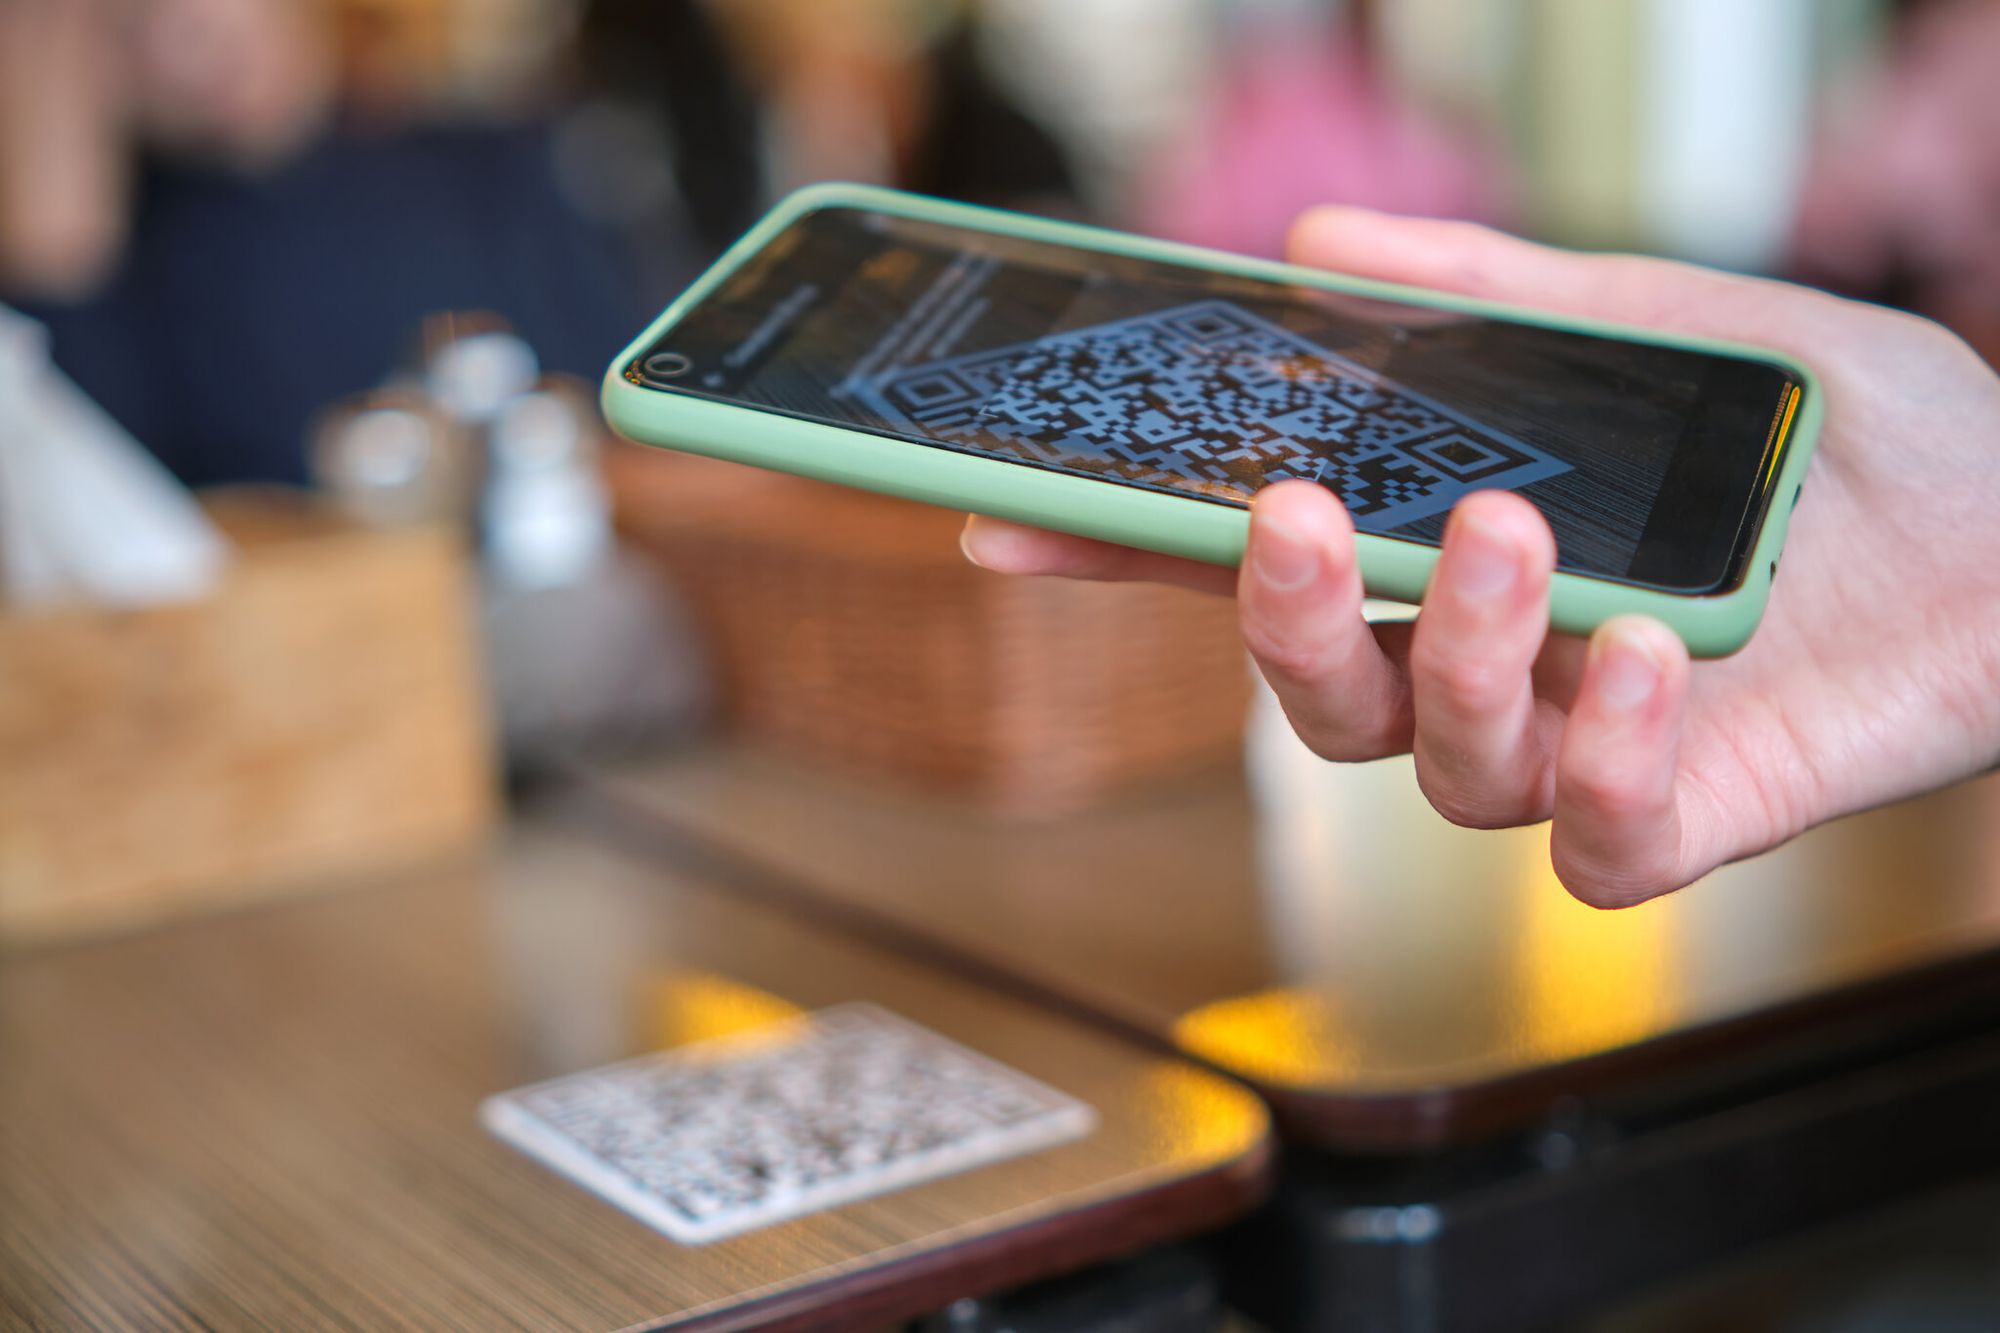 a closeup of hand scanning a QR code on a table